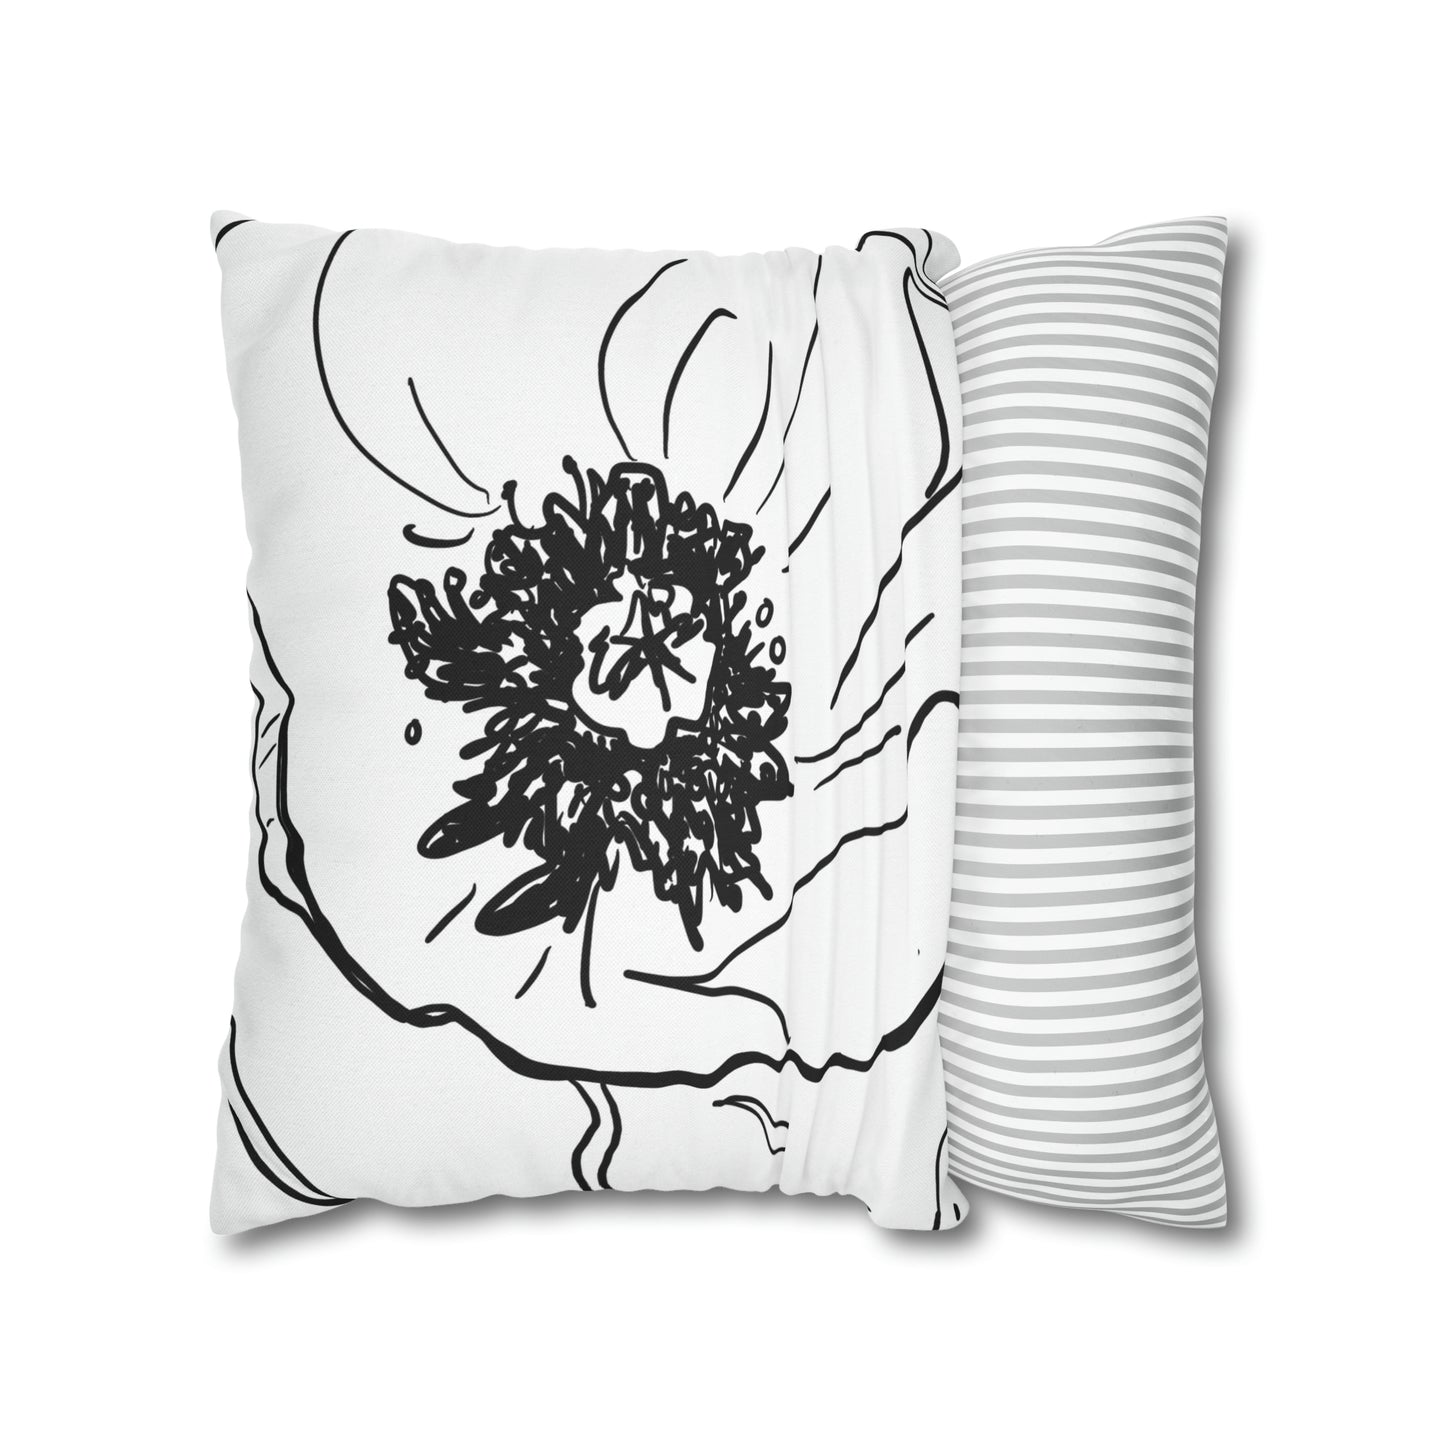 August Birth Flower Double-Sided Pillow Cover